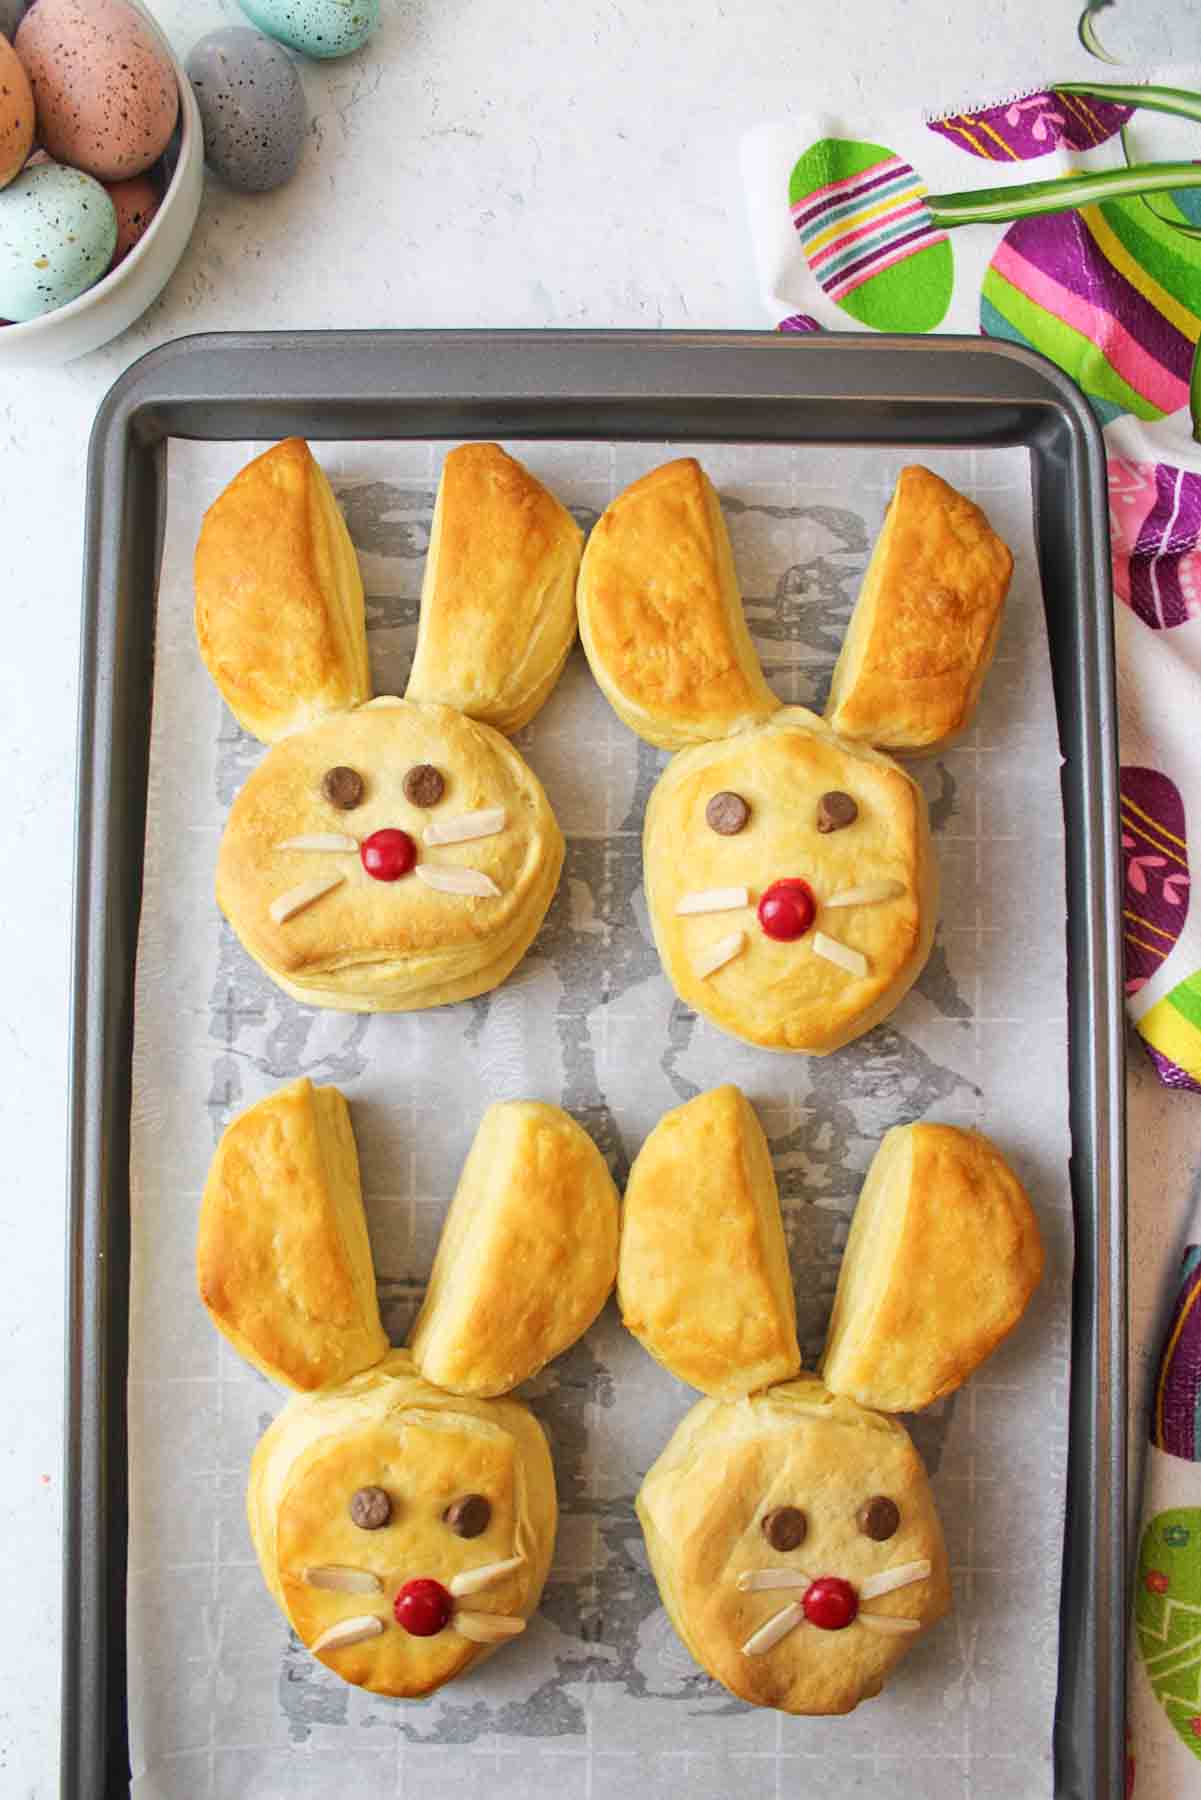 baked bunny biscuits on a baking sheet.